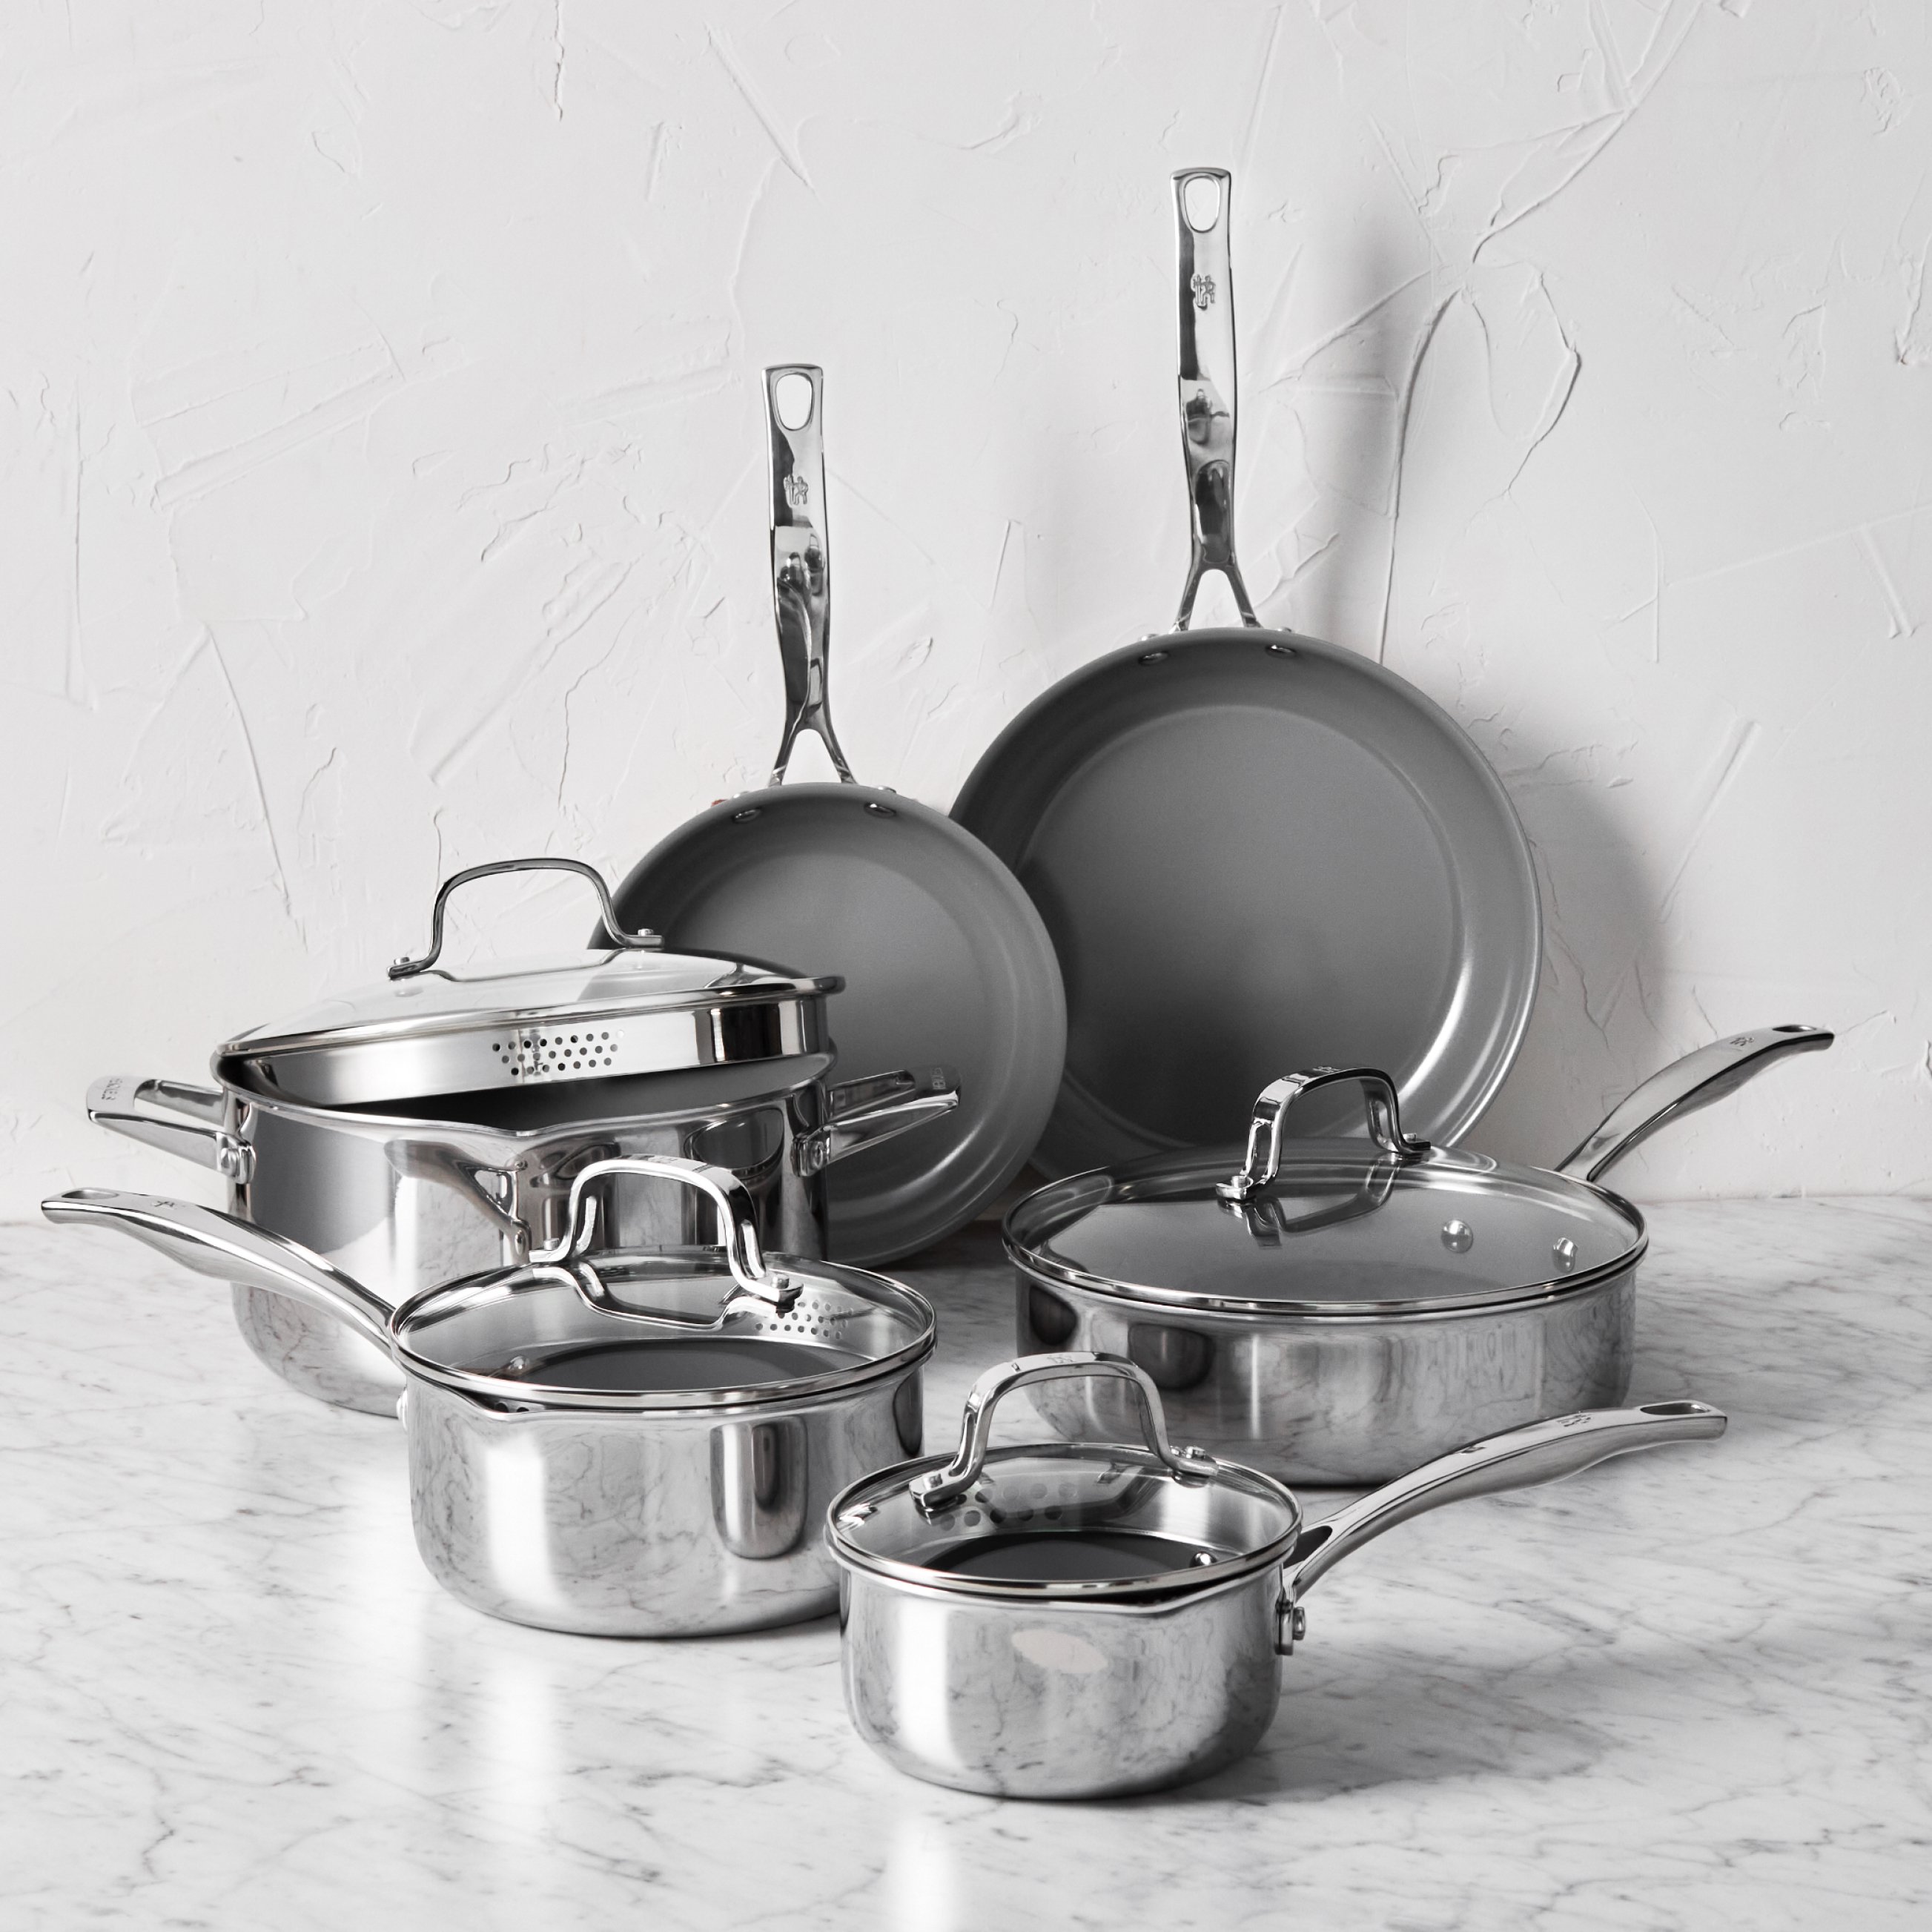 https://www.zwilling.com/on/demandware.static/-/Sites-zwilling-us-Library/default/dwc475e4e0/images/product-content/masonry-content/henckels/cookware/henckels-h3/H3COATED_01.jpg